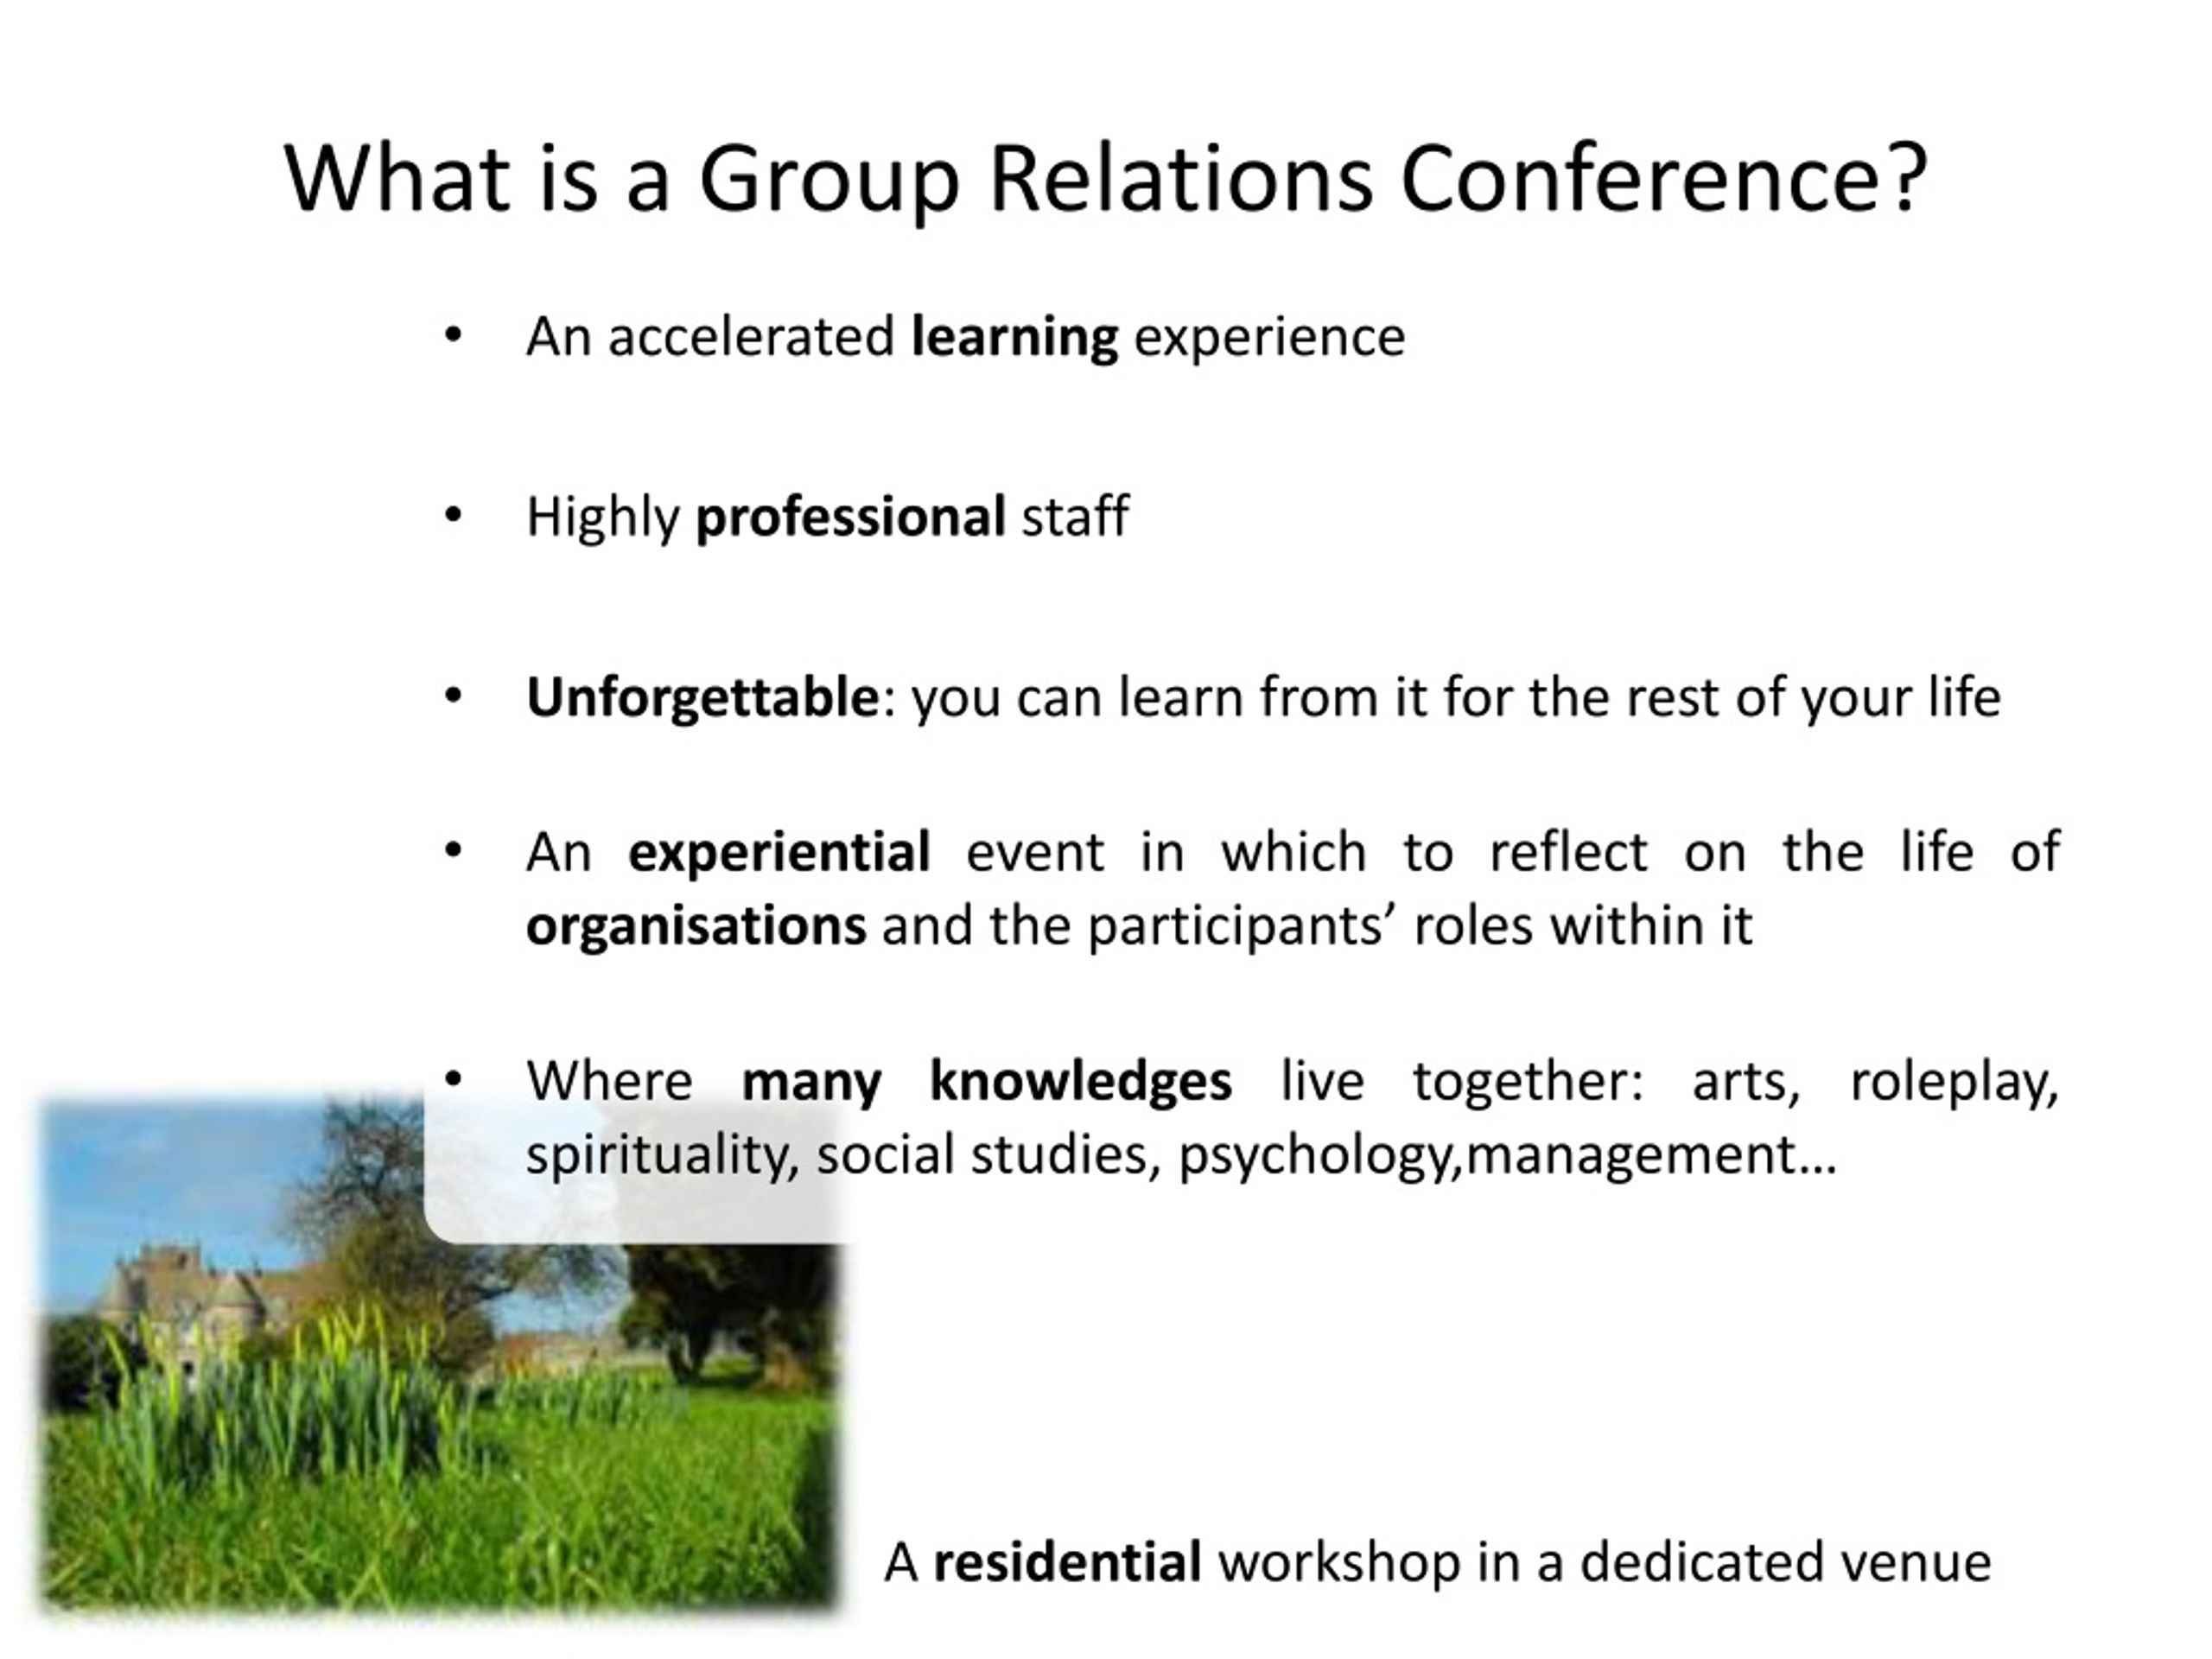 PPT WHAT IS A GROUP RELATIONS CONFERENCE? PowerPoint Presentation